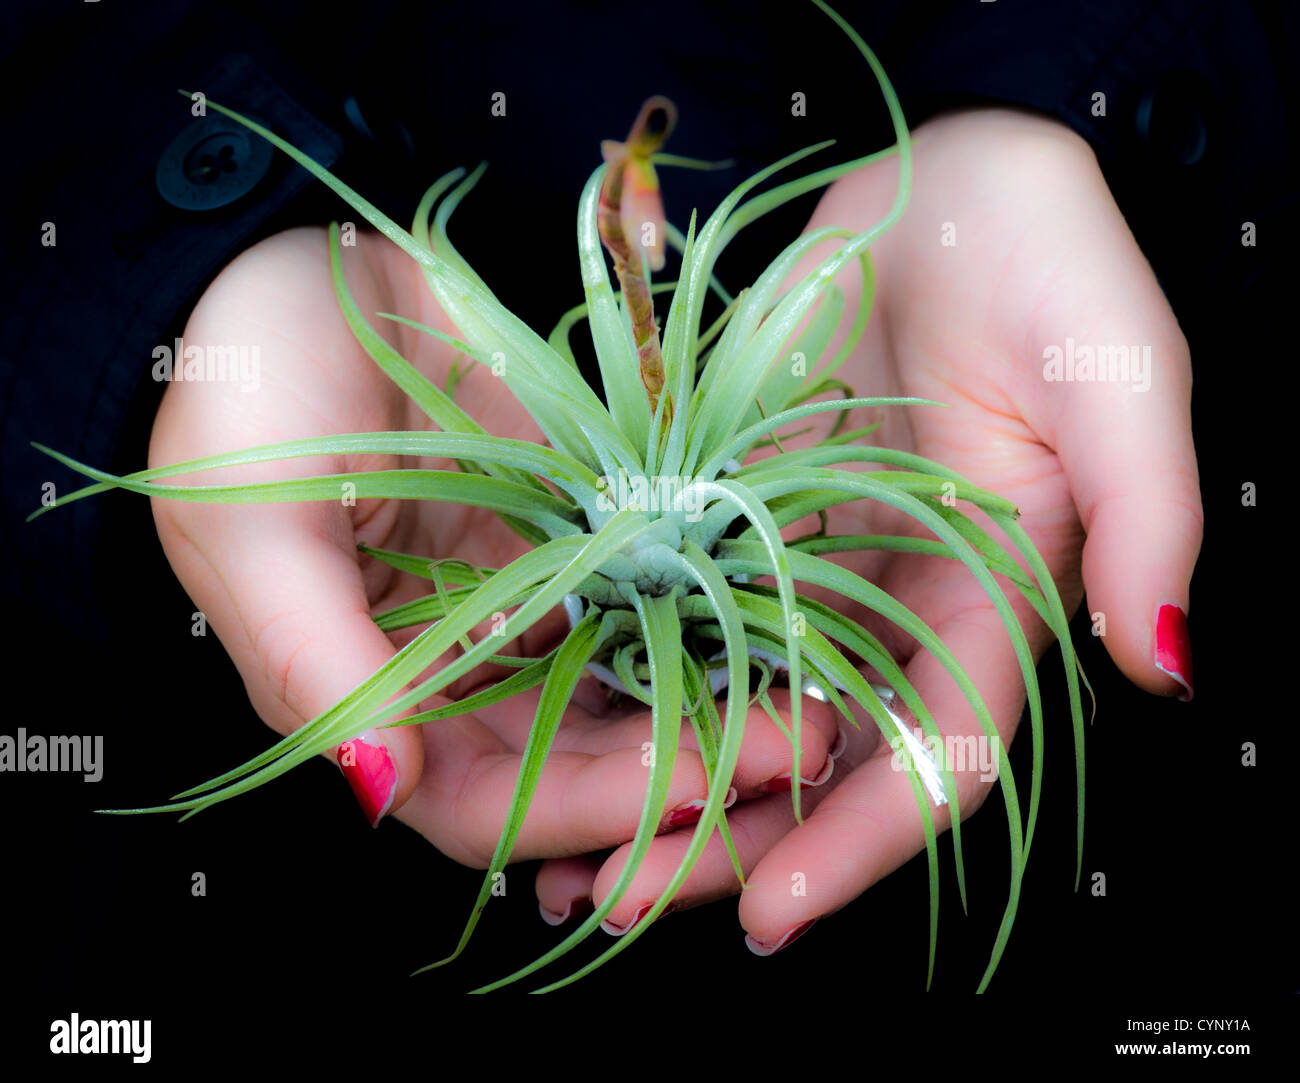 Air plant in hands Stock Photo